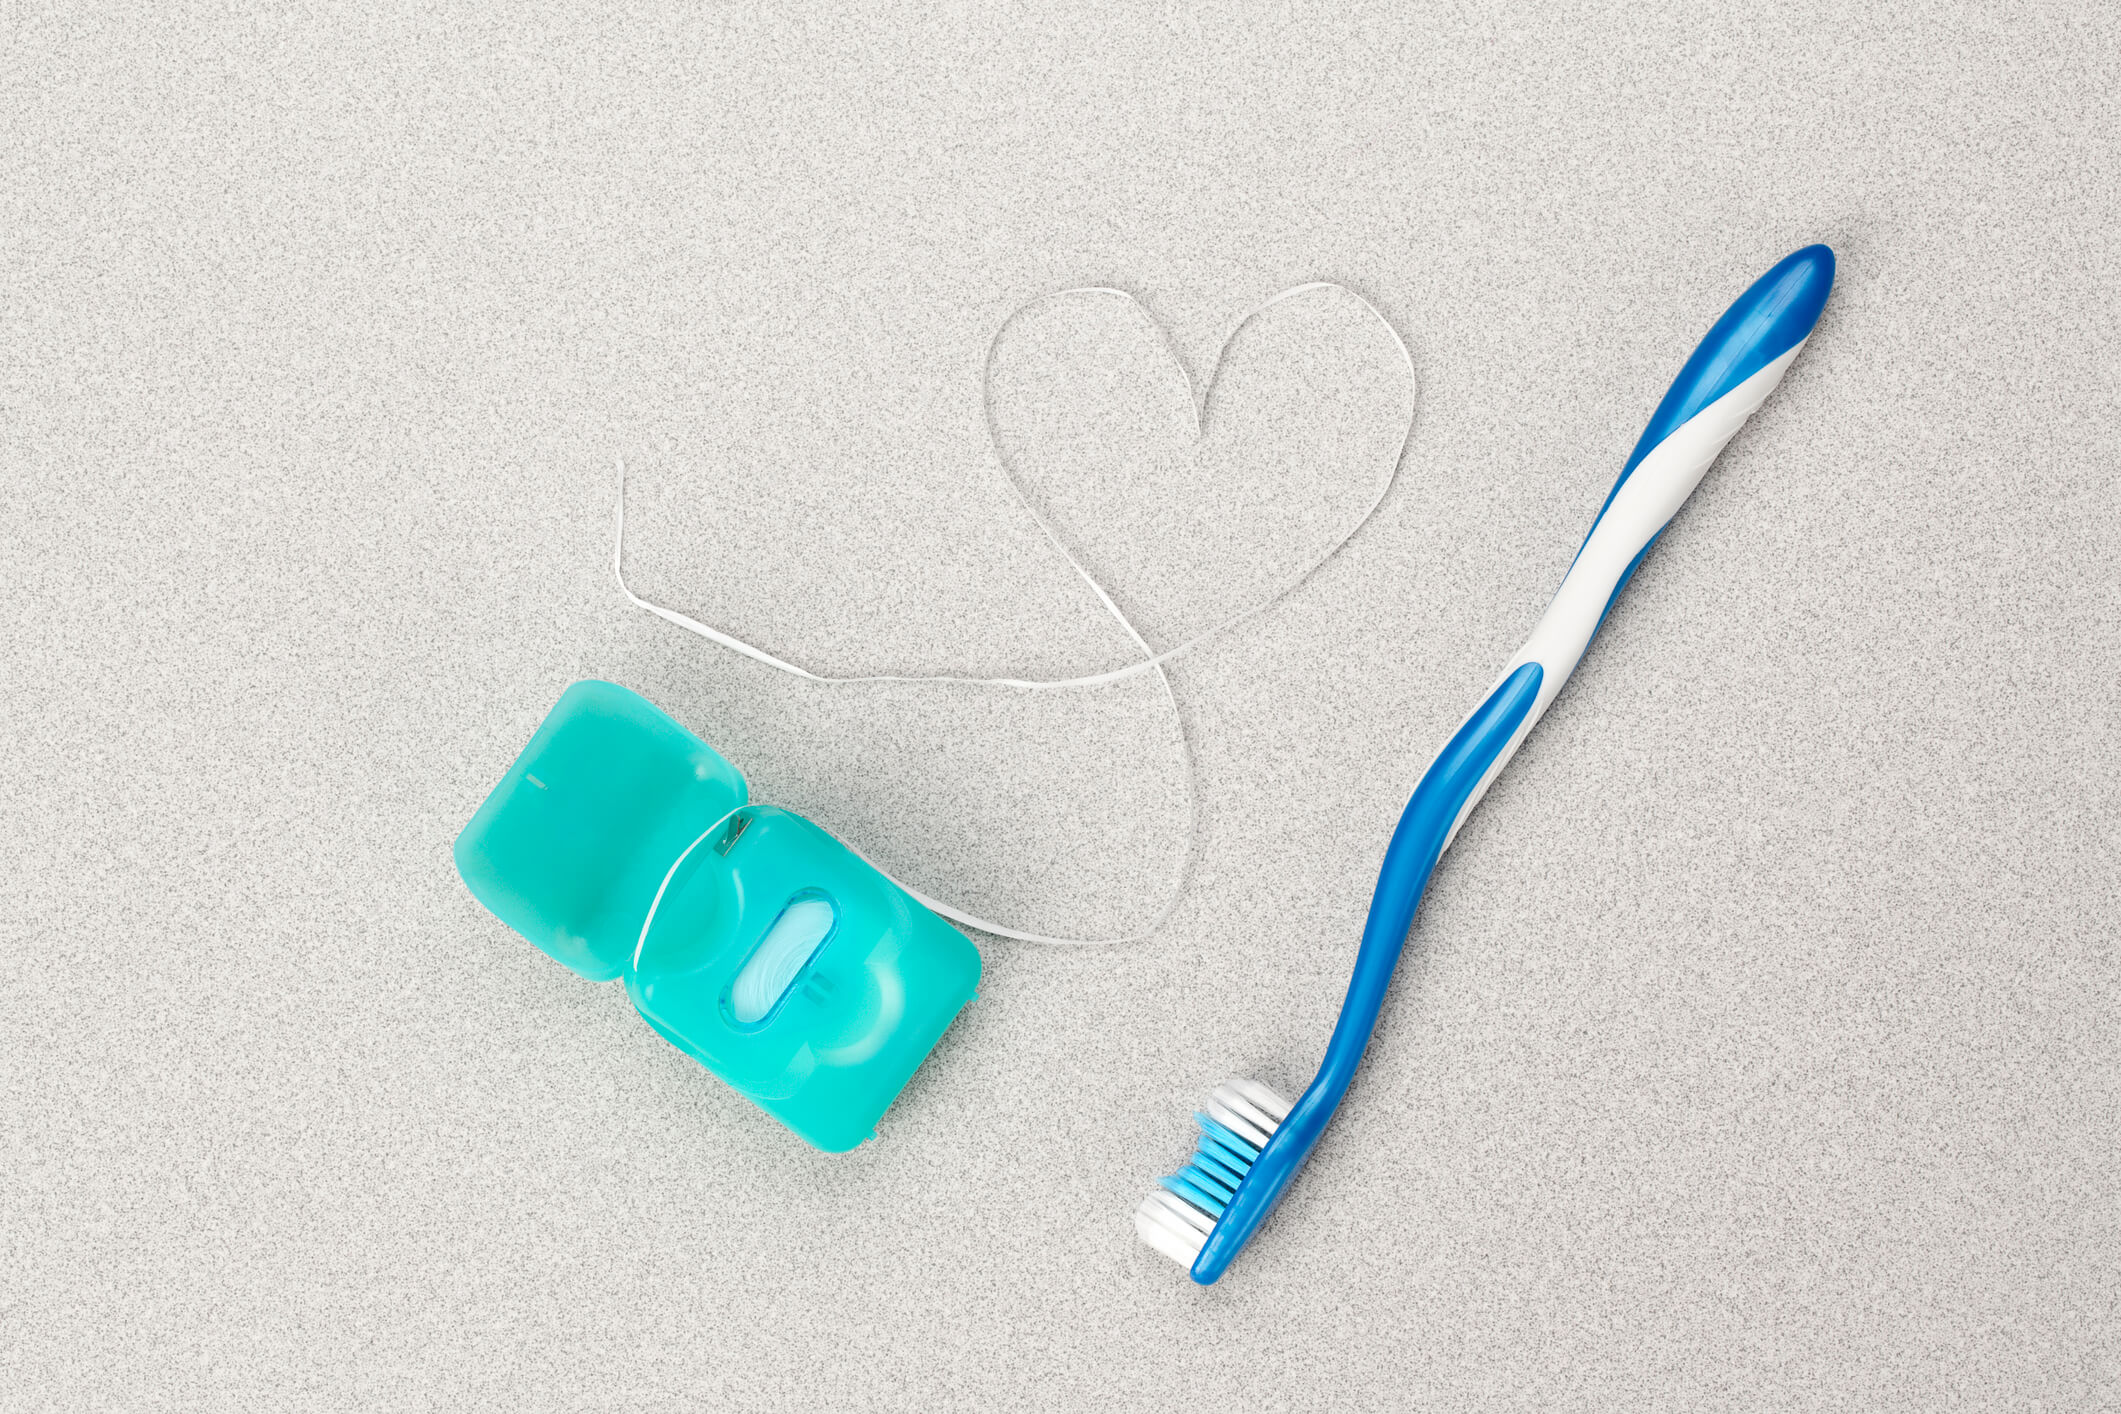 floss in the shape of a heart with toothbrush